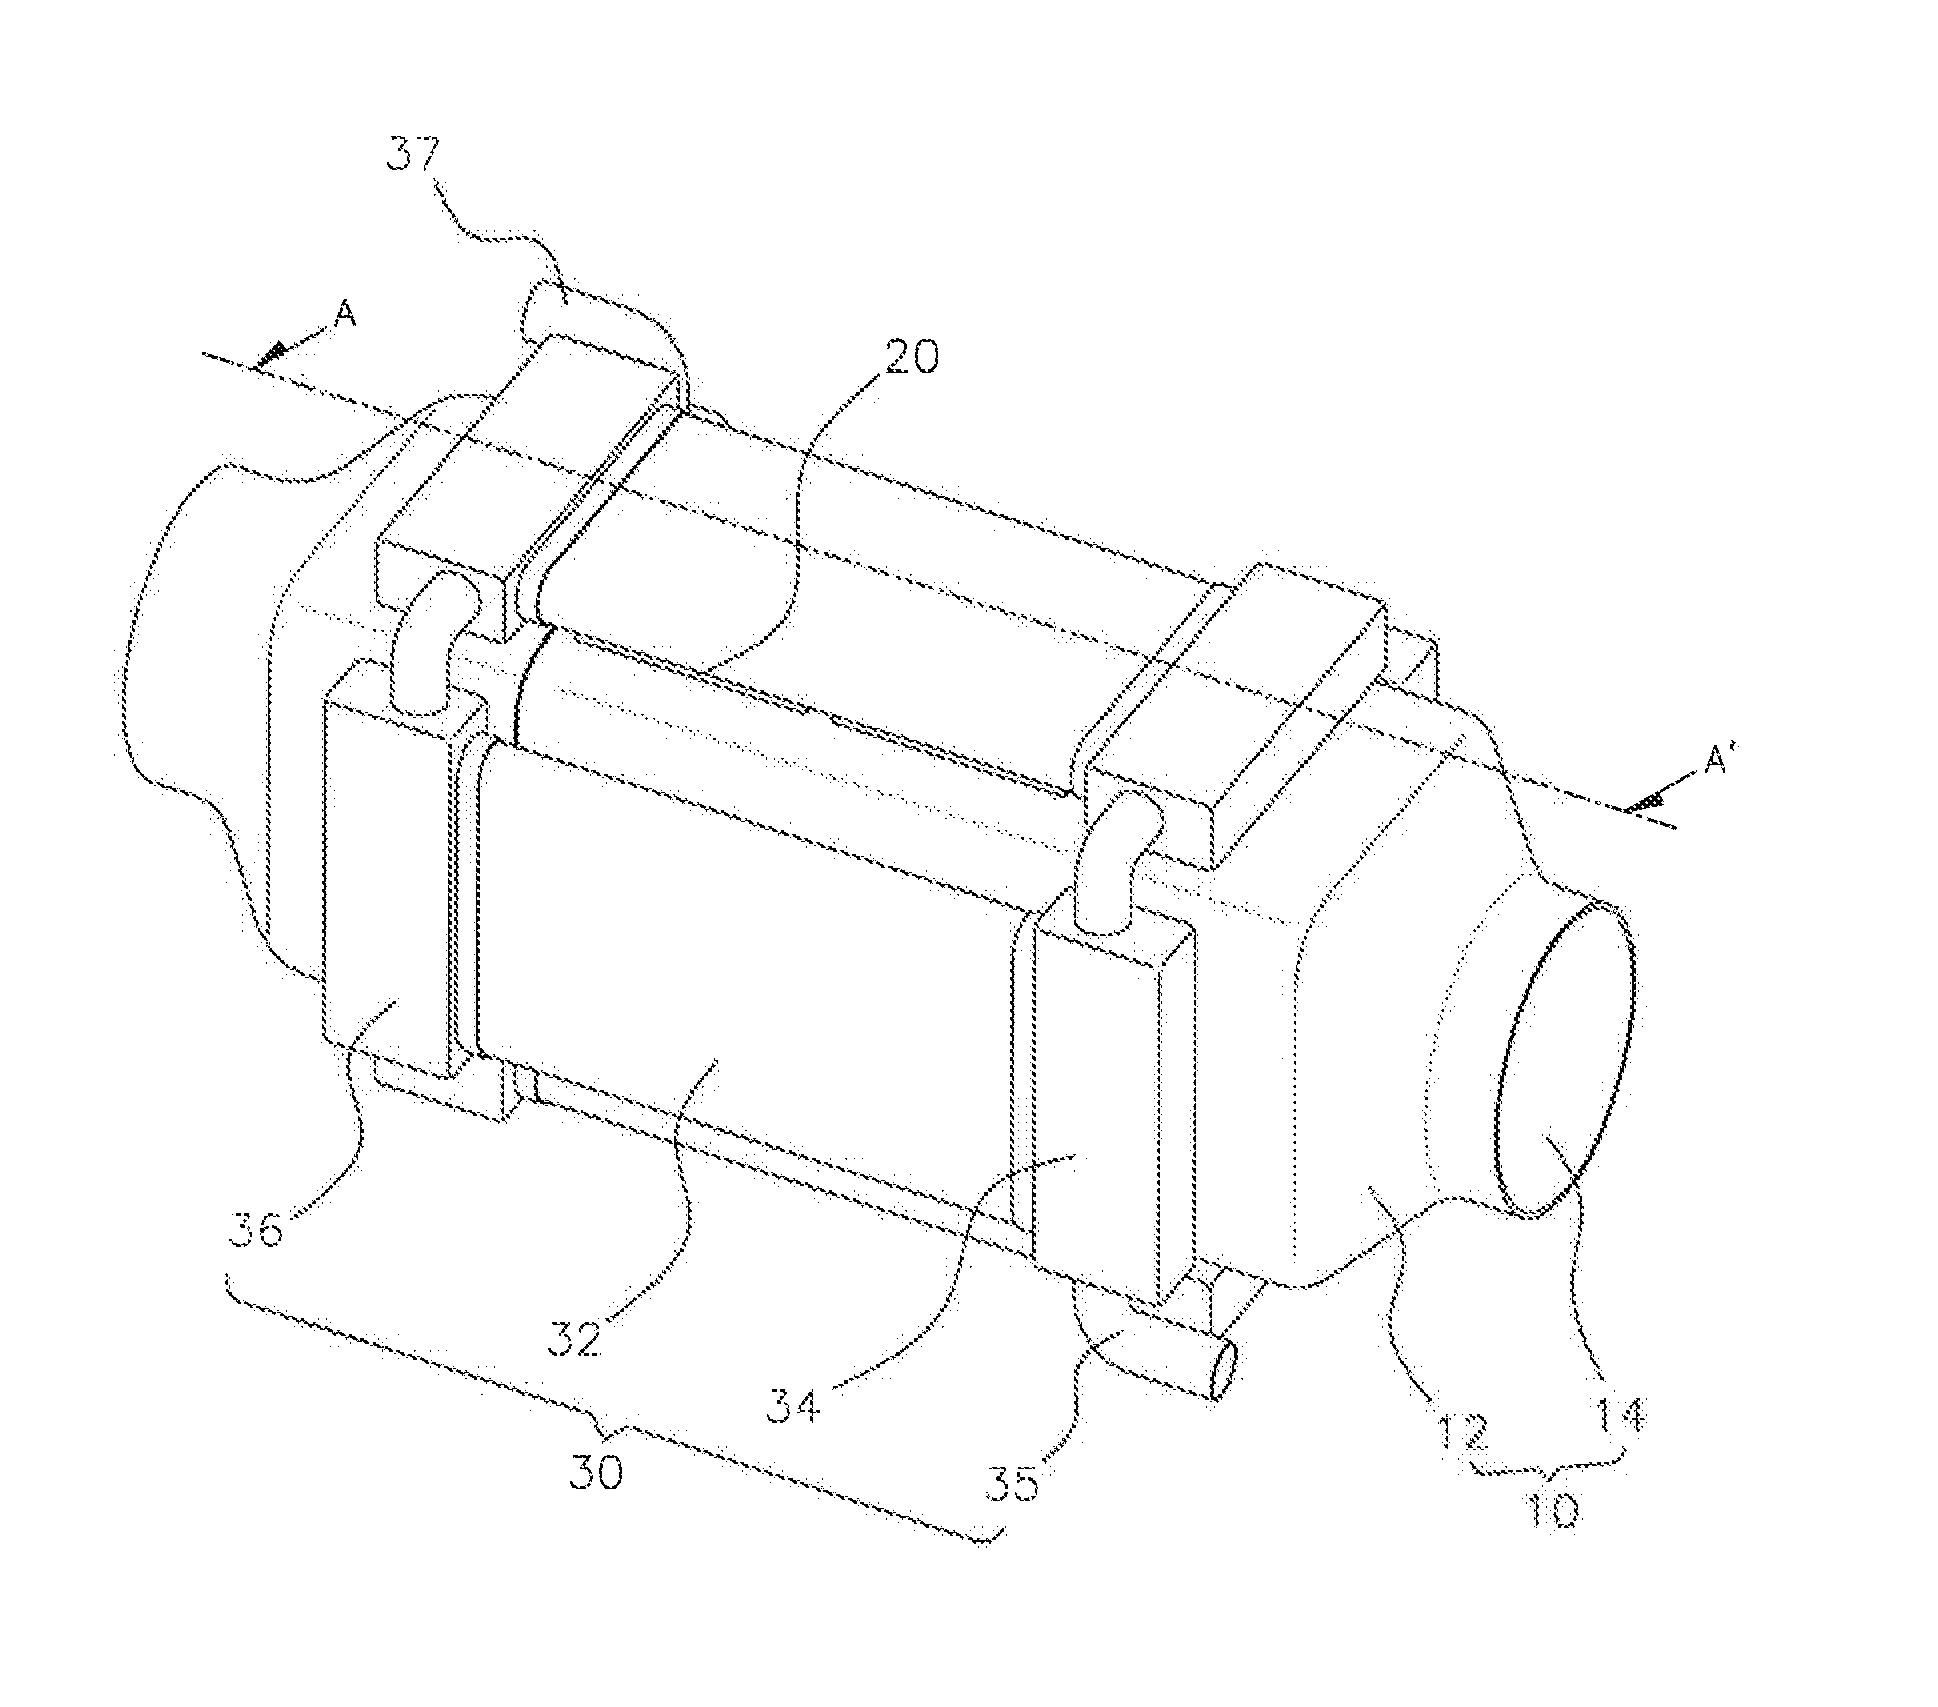 Structure for utilizing exhaust heat of vehicle